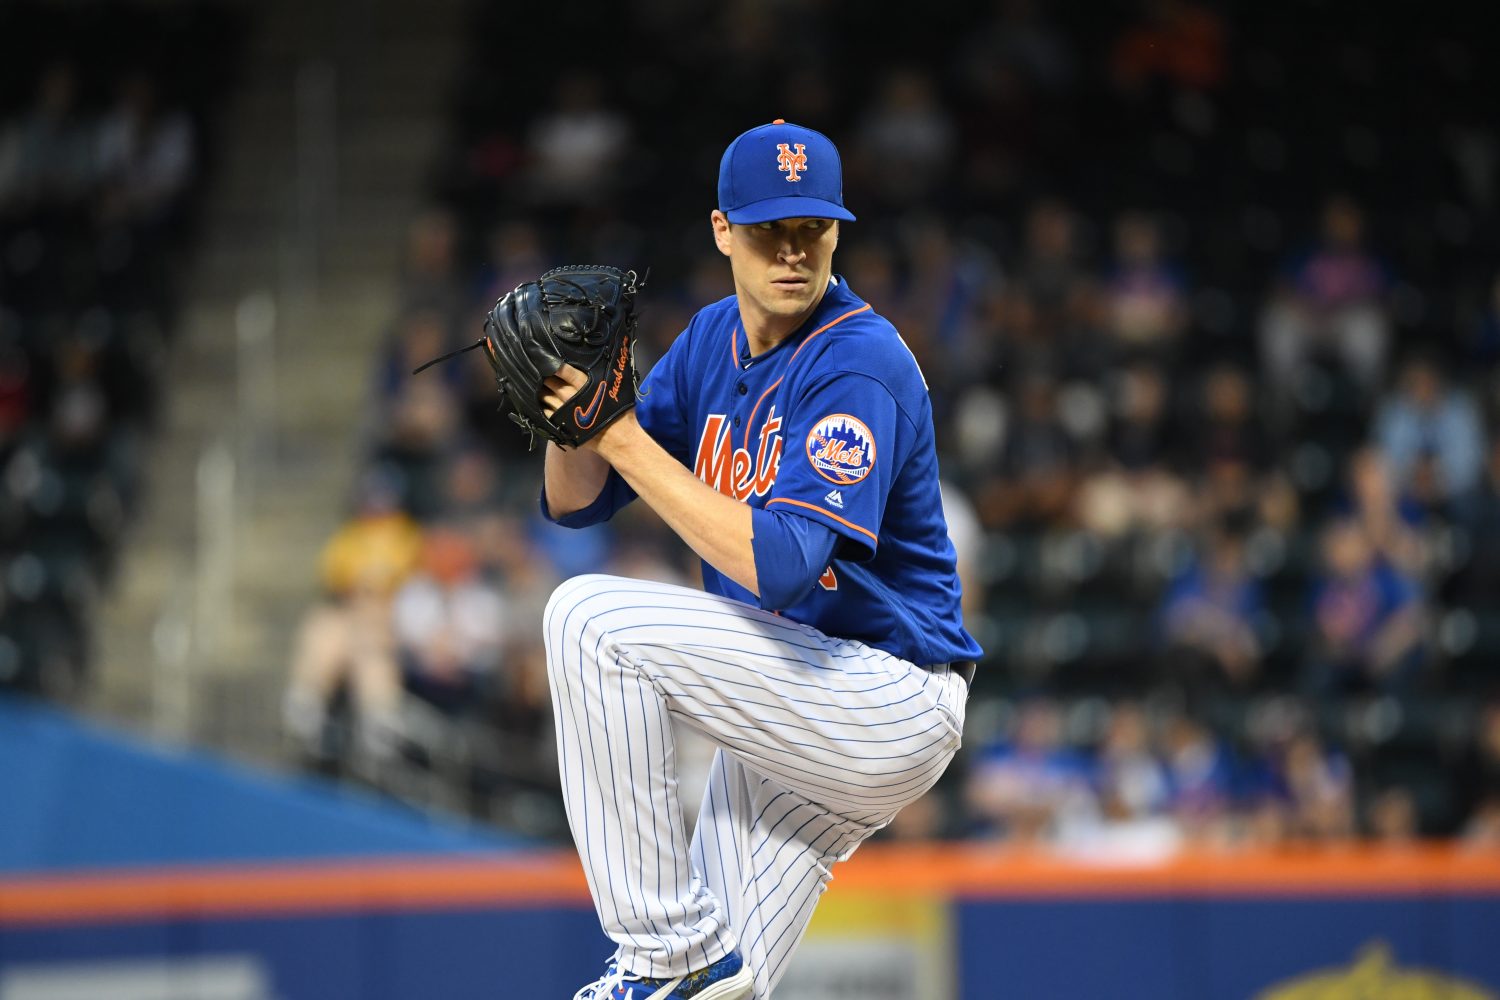 Jacob deGrom Winds Up for a Pitch